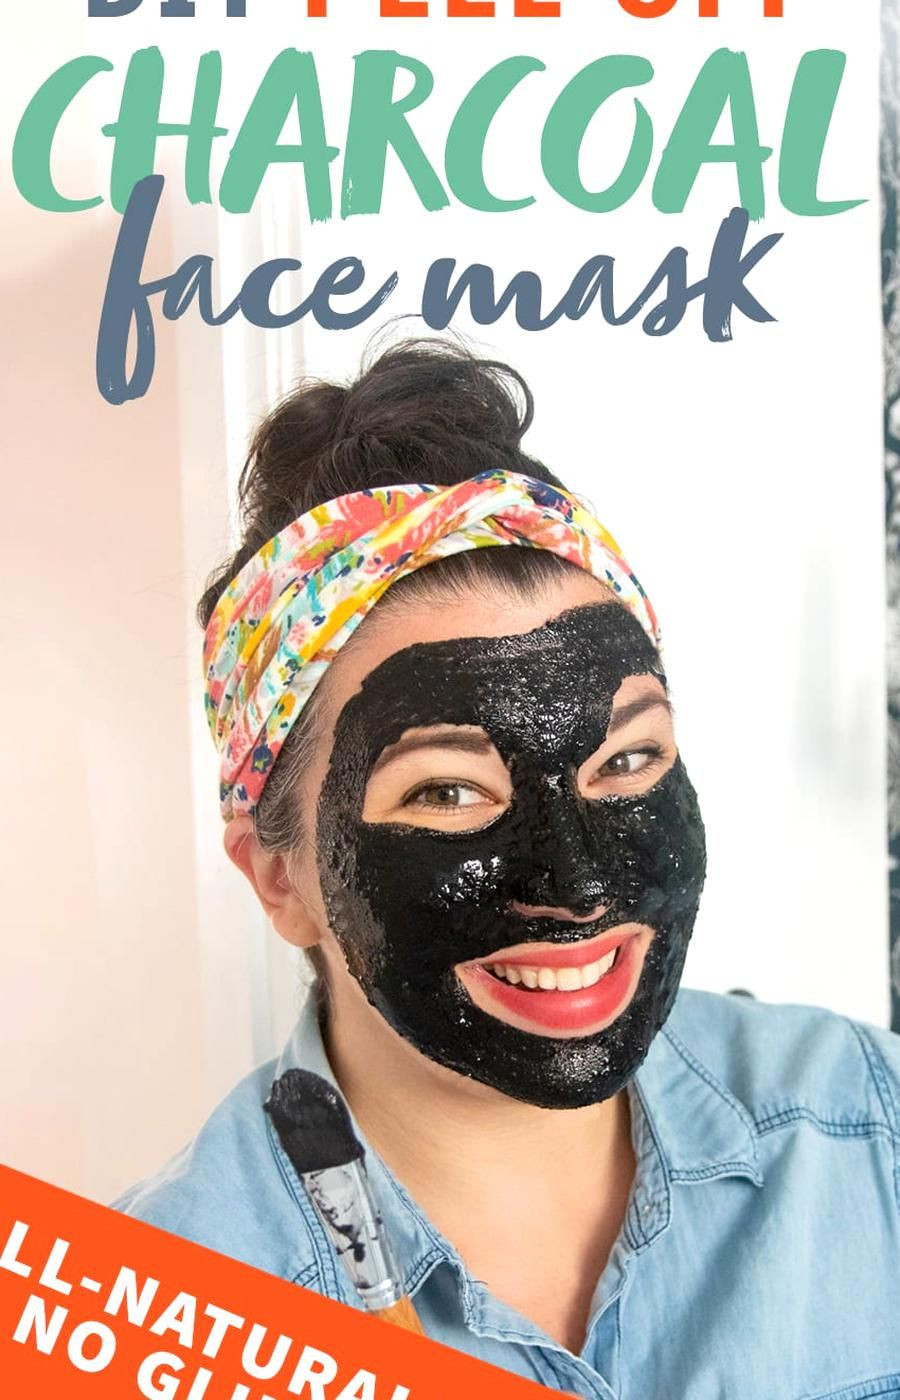 Charcoal And Glue Mask DIY
 This DIY Peel f Face Mask with Activated Charcoal uses